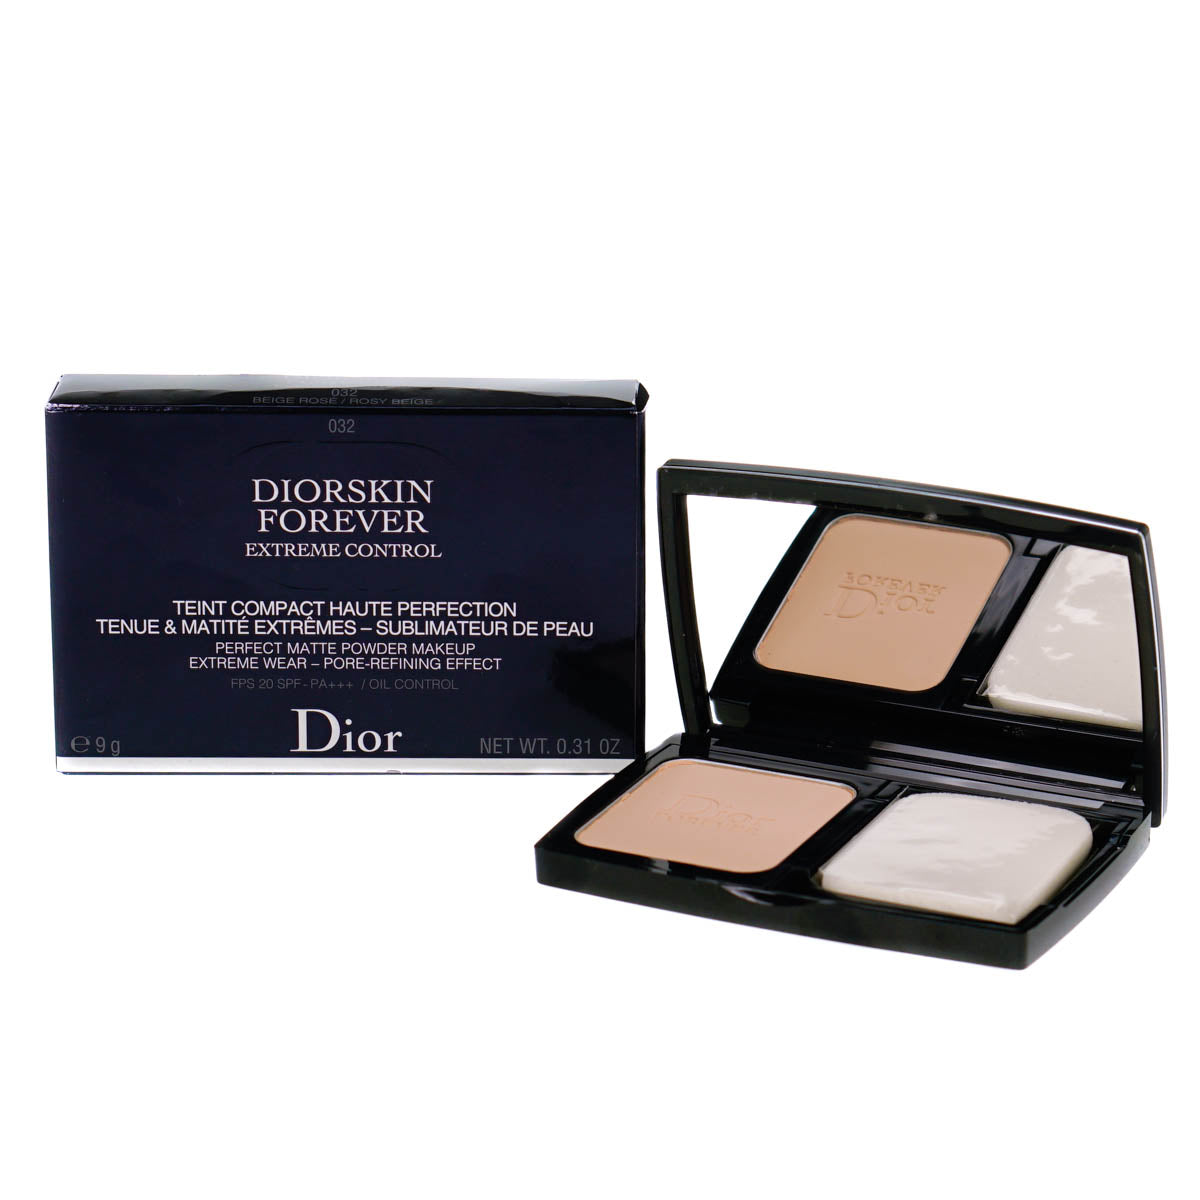 Dior Diorskin Forever Extreme Control Foundation 032 Rosy Beige